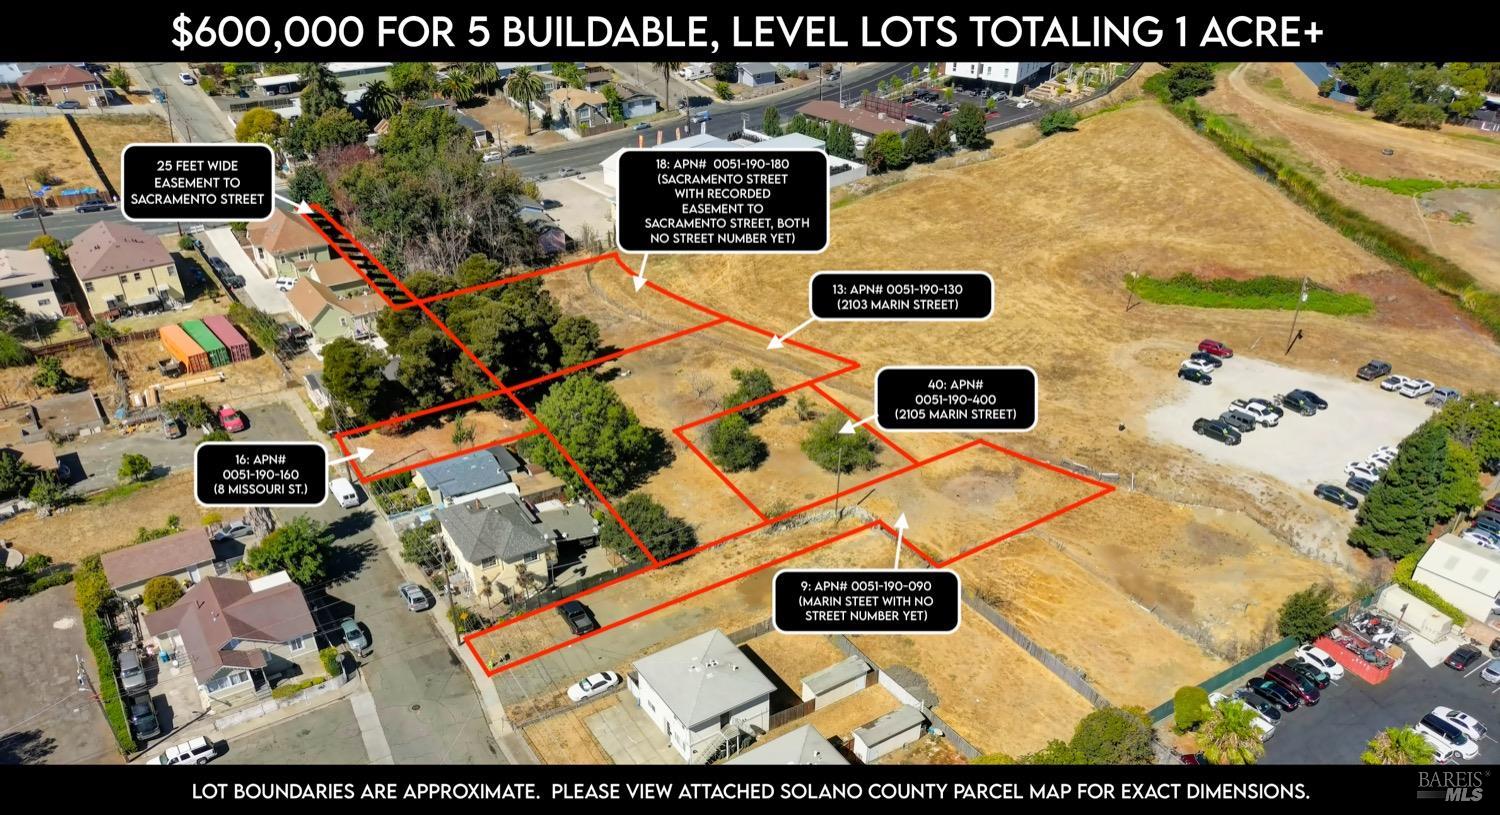 5 adjoining level residential parcels.  Access to Misssouri, Marin, & Sacramento (25 ft wide easement) Sts.